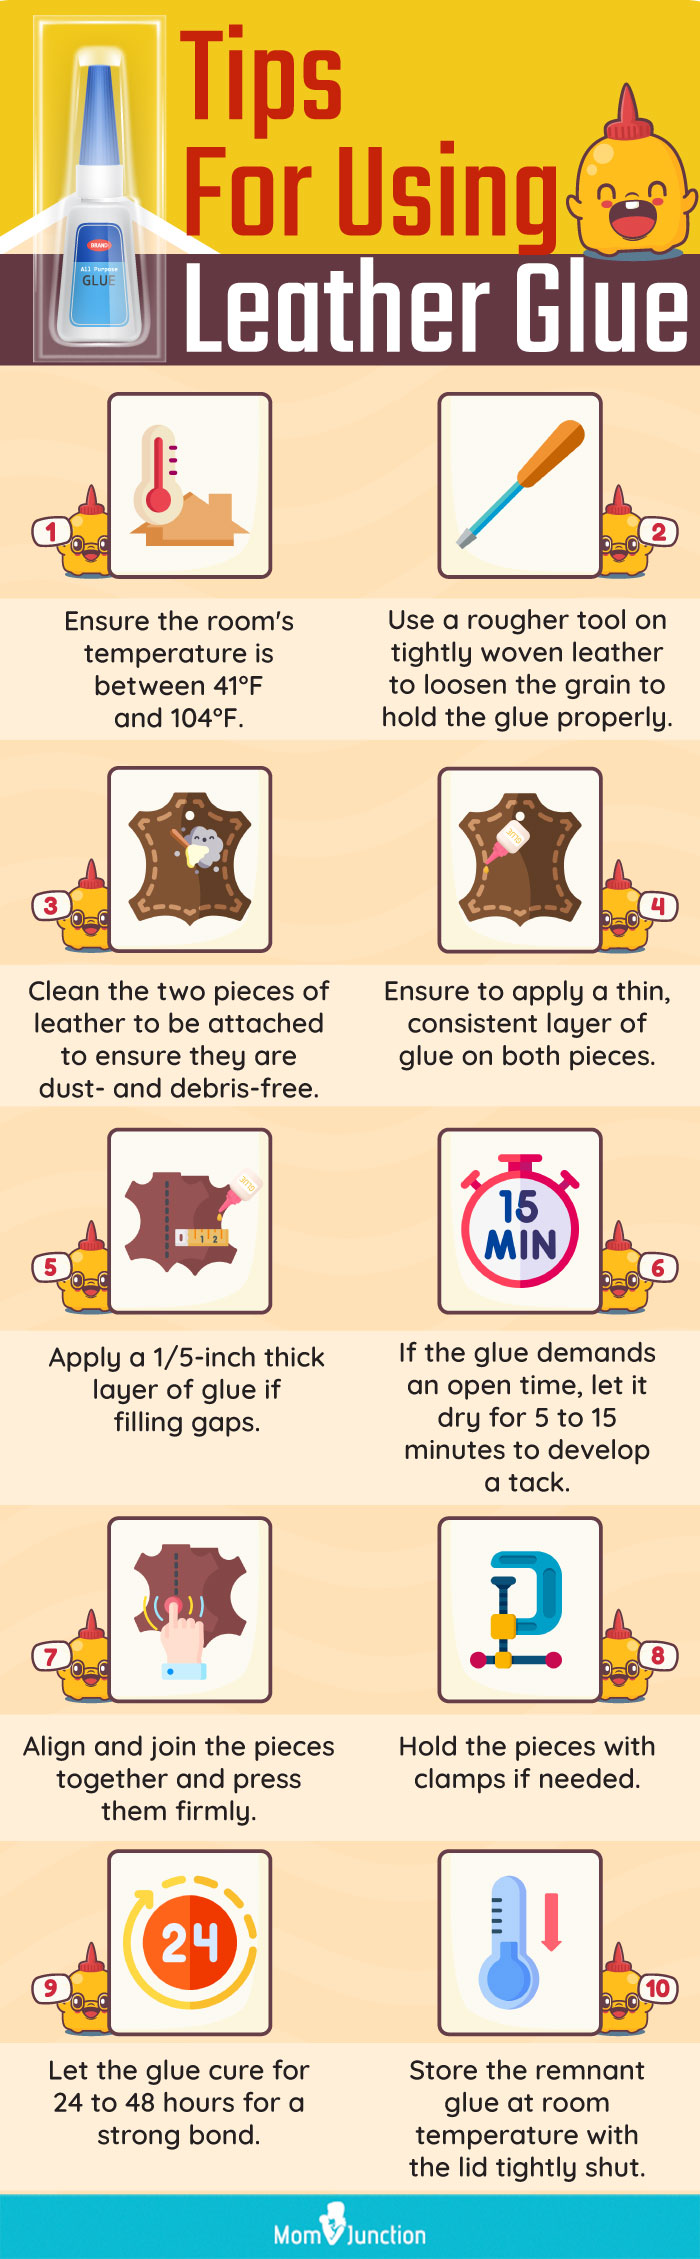 Tips For Using Leather Glue (infographic)